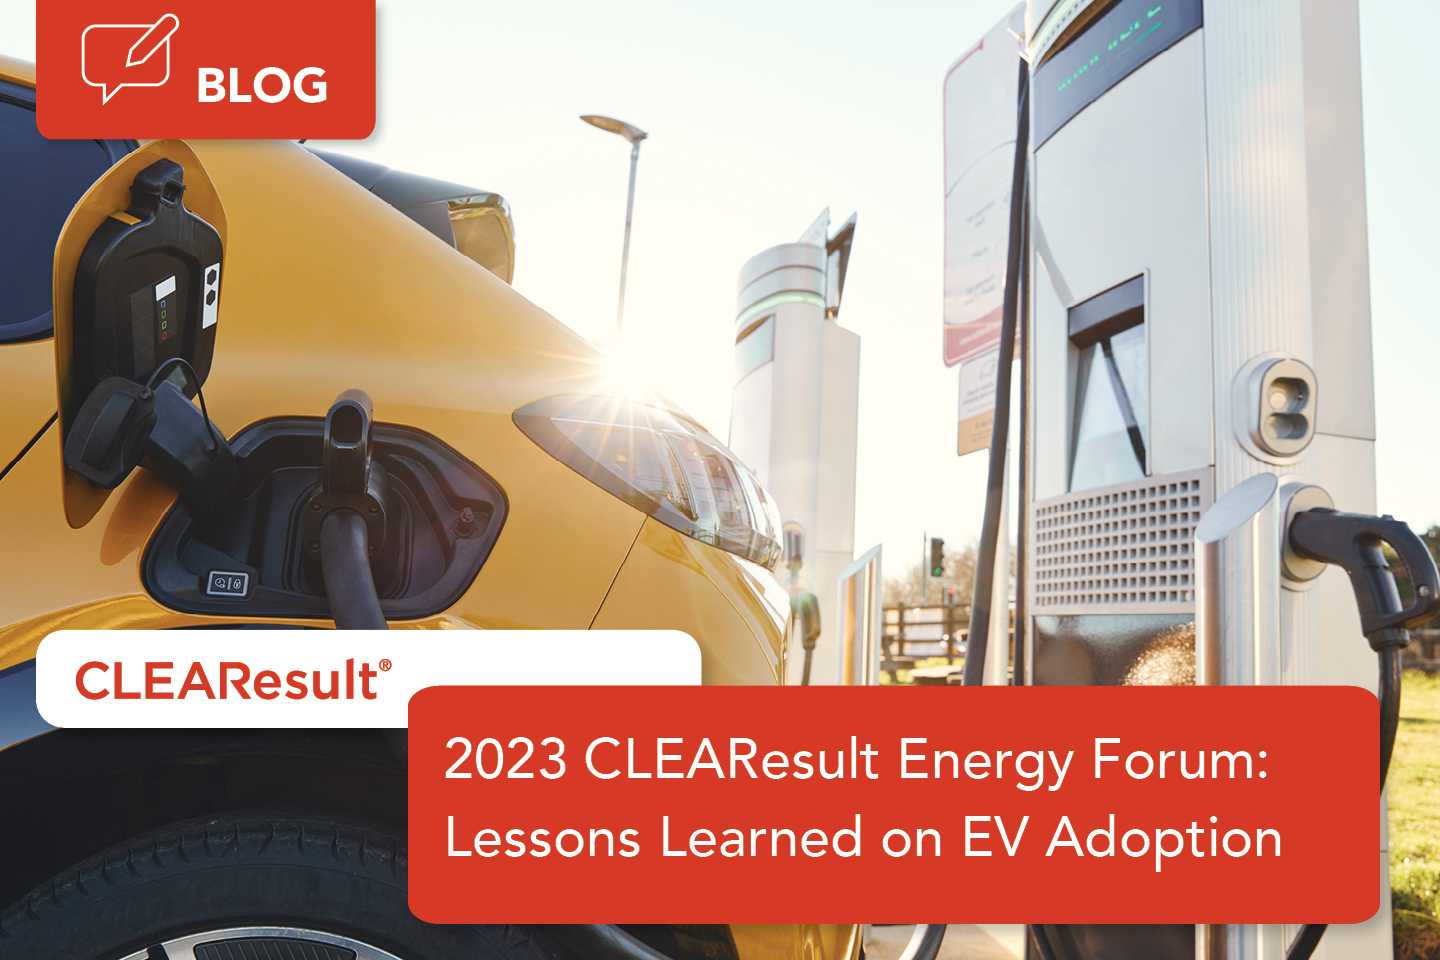 Lessons learned from the 2023 CLEAResult Energy Forum EV adoption breakout session